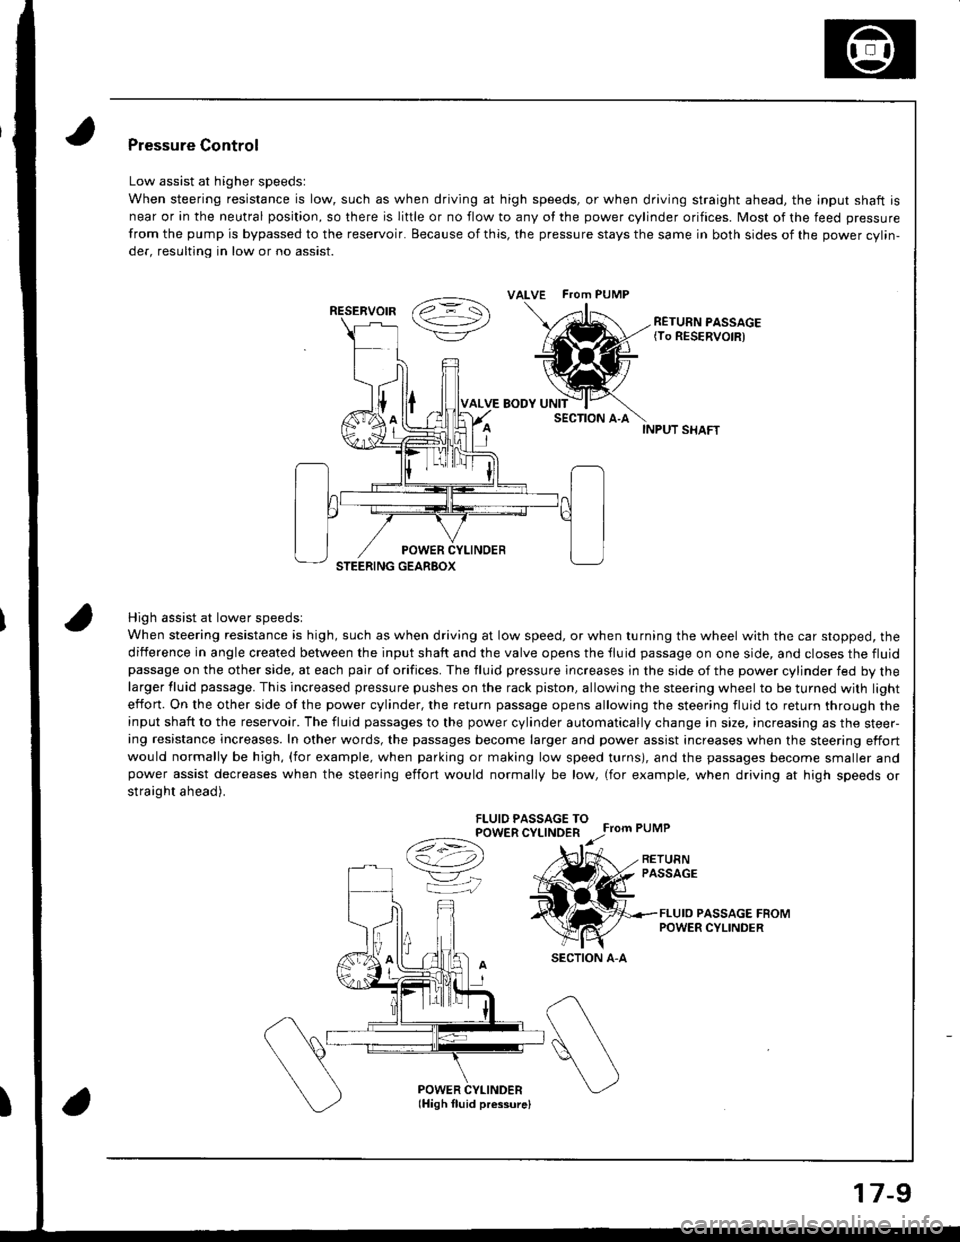 HONDA INTEGRA 1998 4.G Workshop Manual INPUT SHAFT
High assist at lower speedsl
When steering resistance is high, such as when driving at low speed, or when turning the wheel with the car stopped, the
diiference in angle created between th